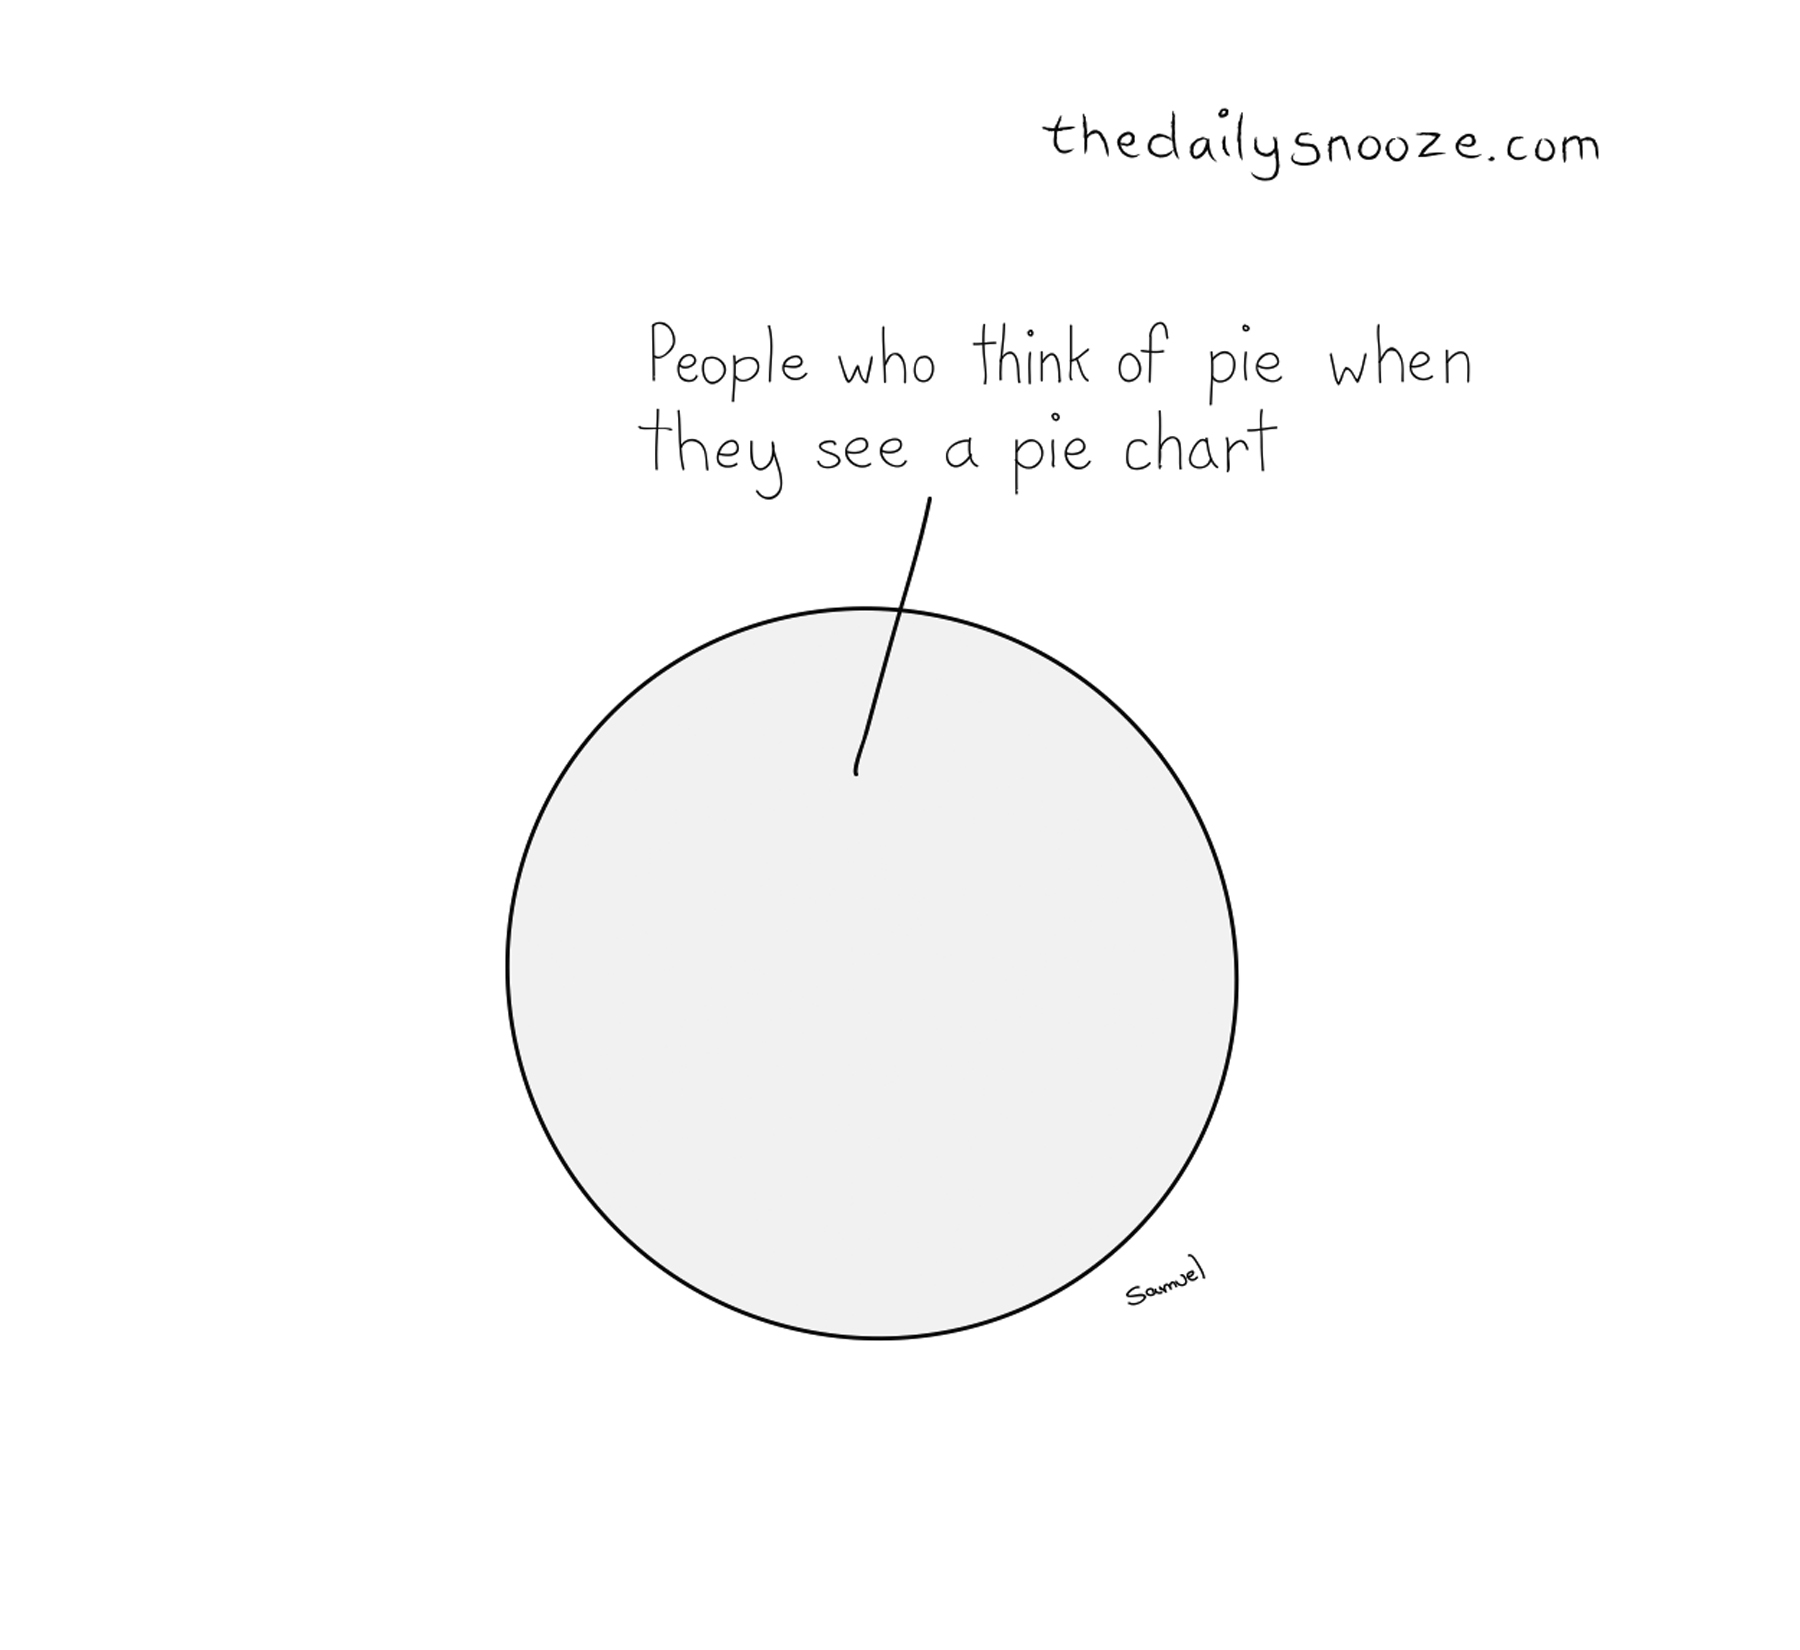 People who think of pie when they see a pie chart